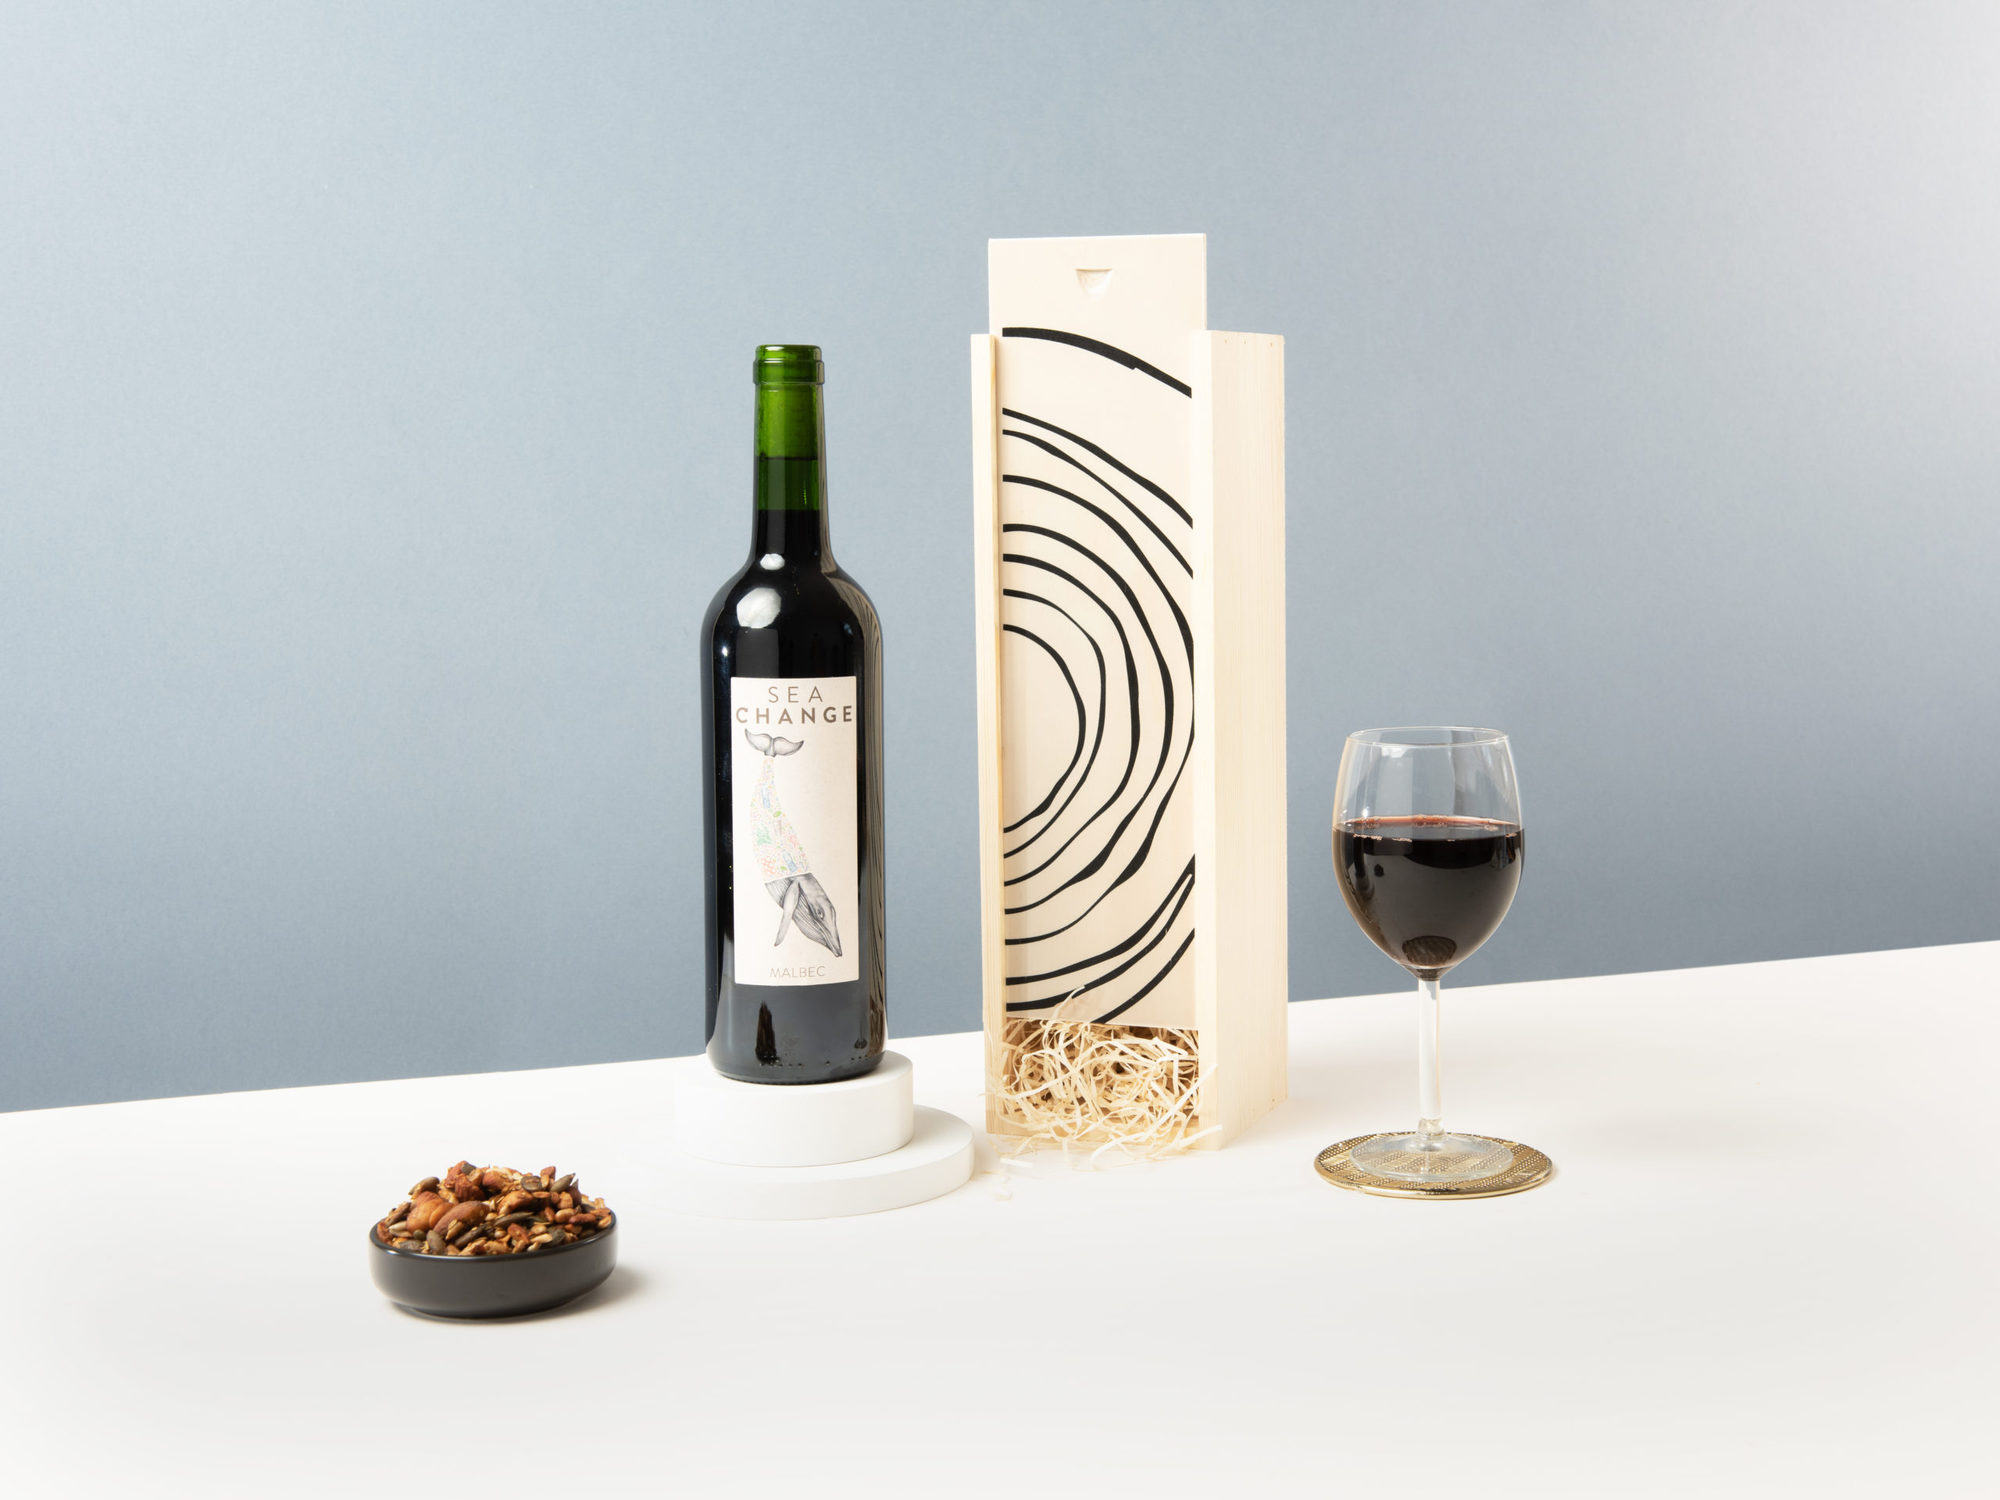 Build Your Own Wine Gift – Single Bottle & Chocolate Gift